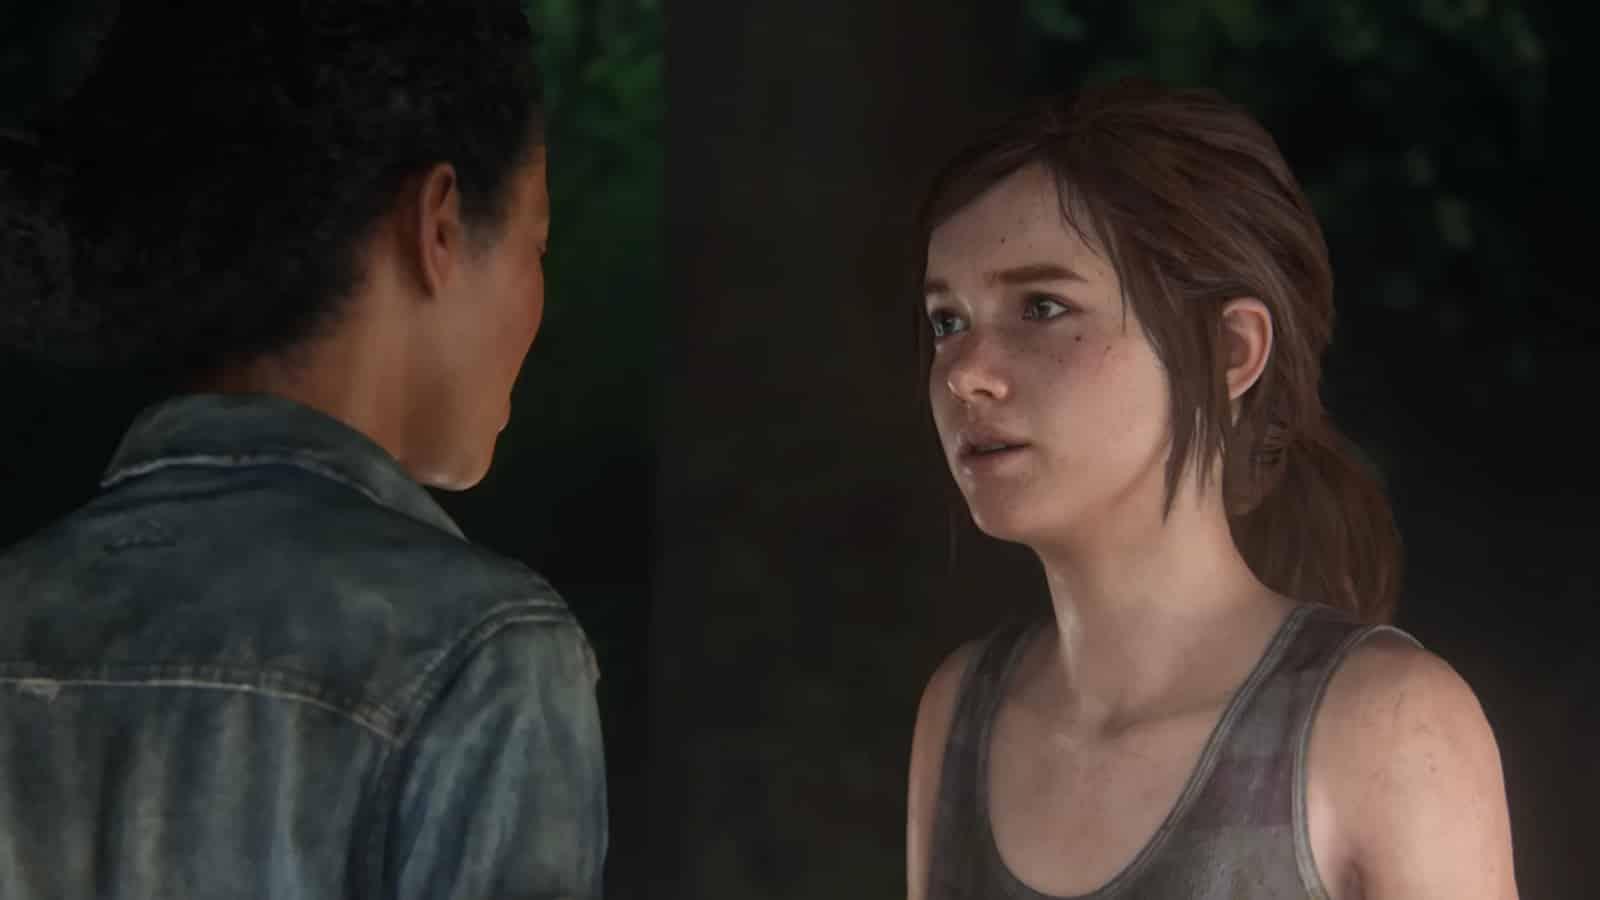 The Last of Us remake is coming to PS5 and PC in September